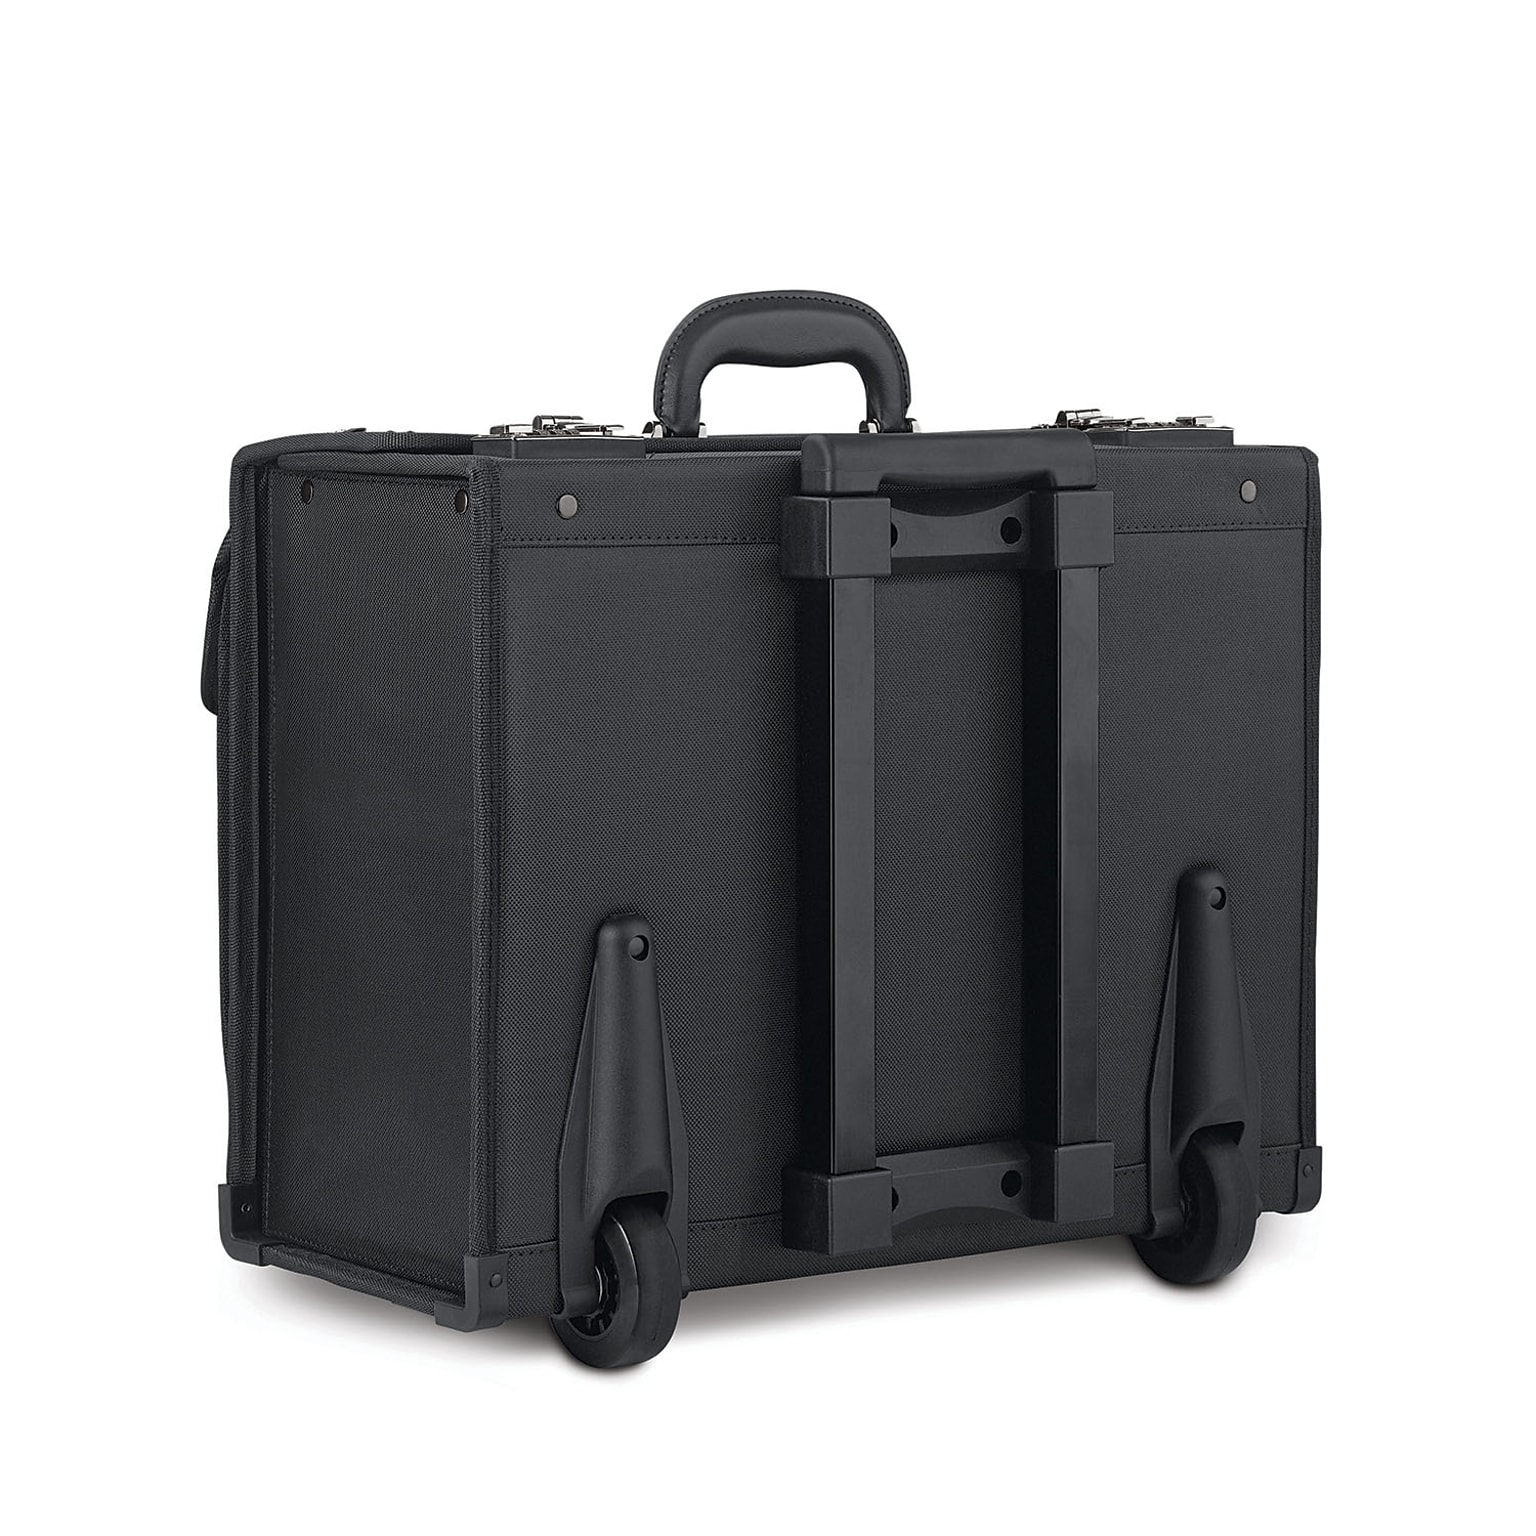 Solo New York Classic Laptop Rolling Briefcase, Black Polyester (PV78-4)